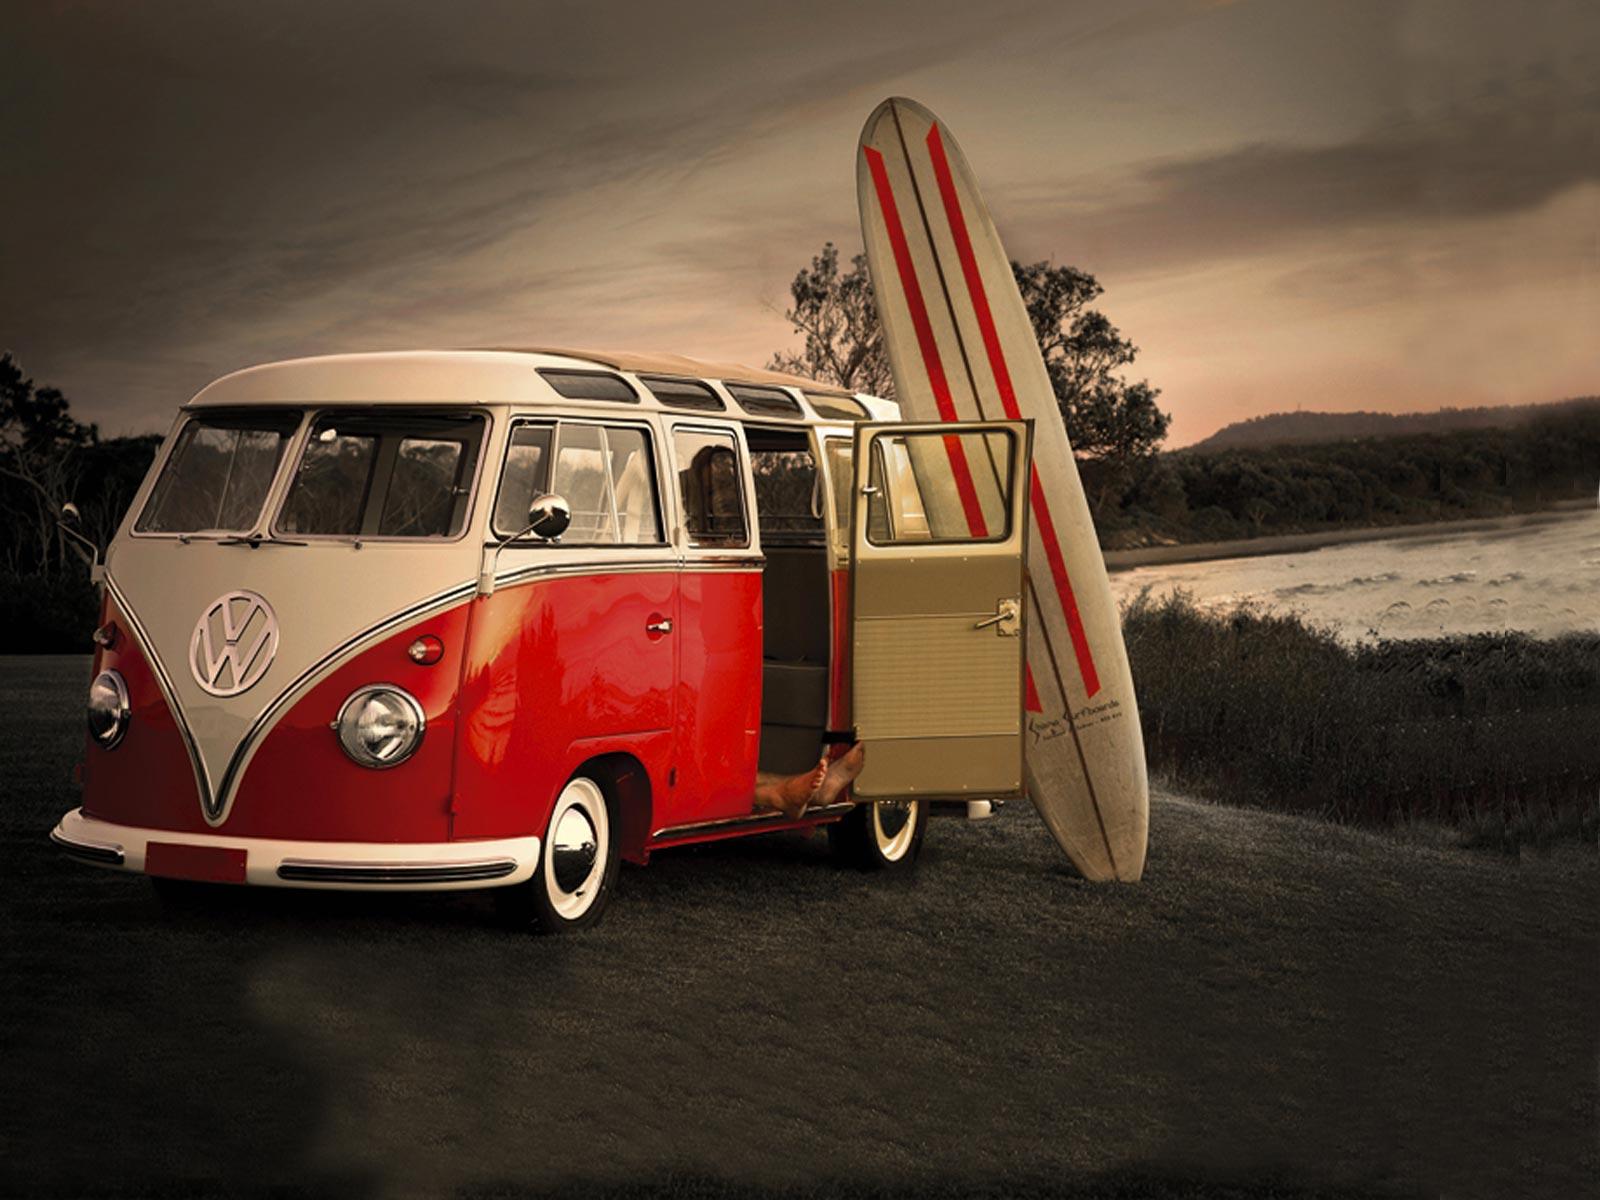 Surf And Old VW Wallpaper IPhone Wallpaper